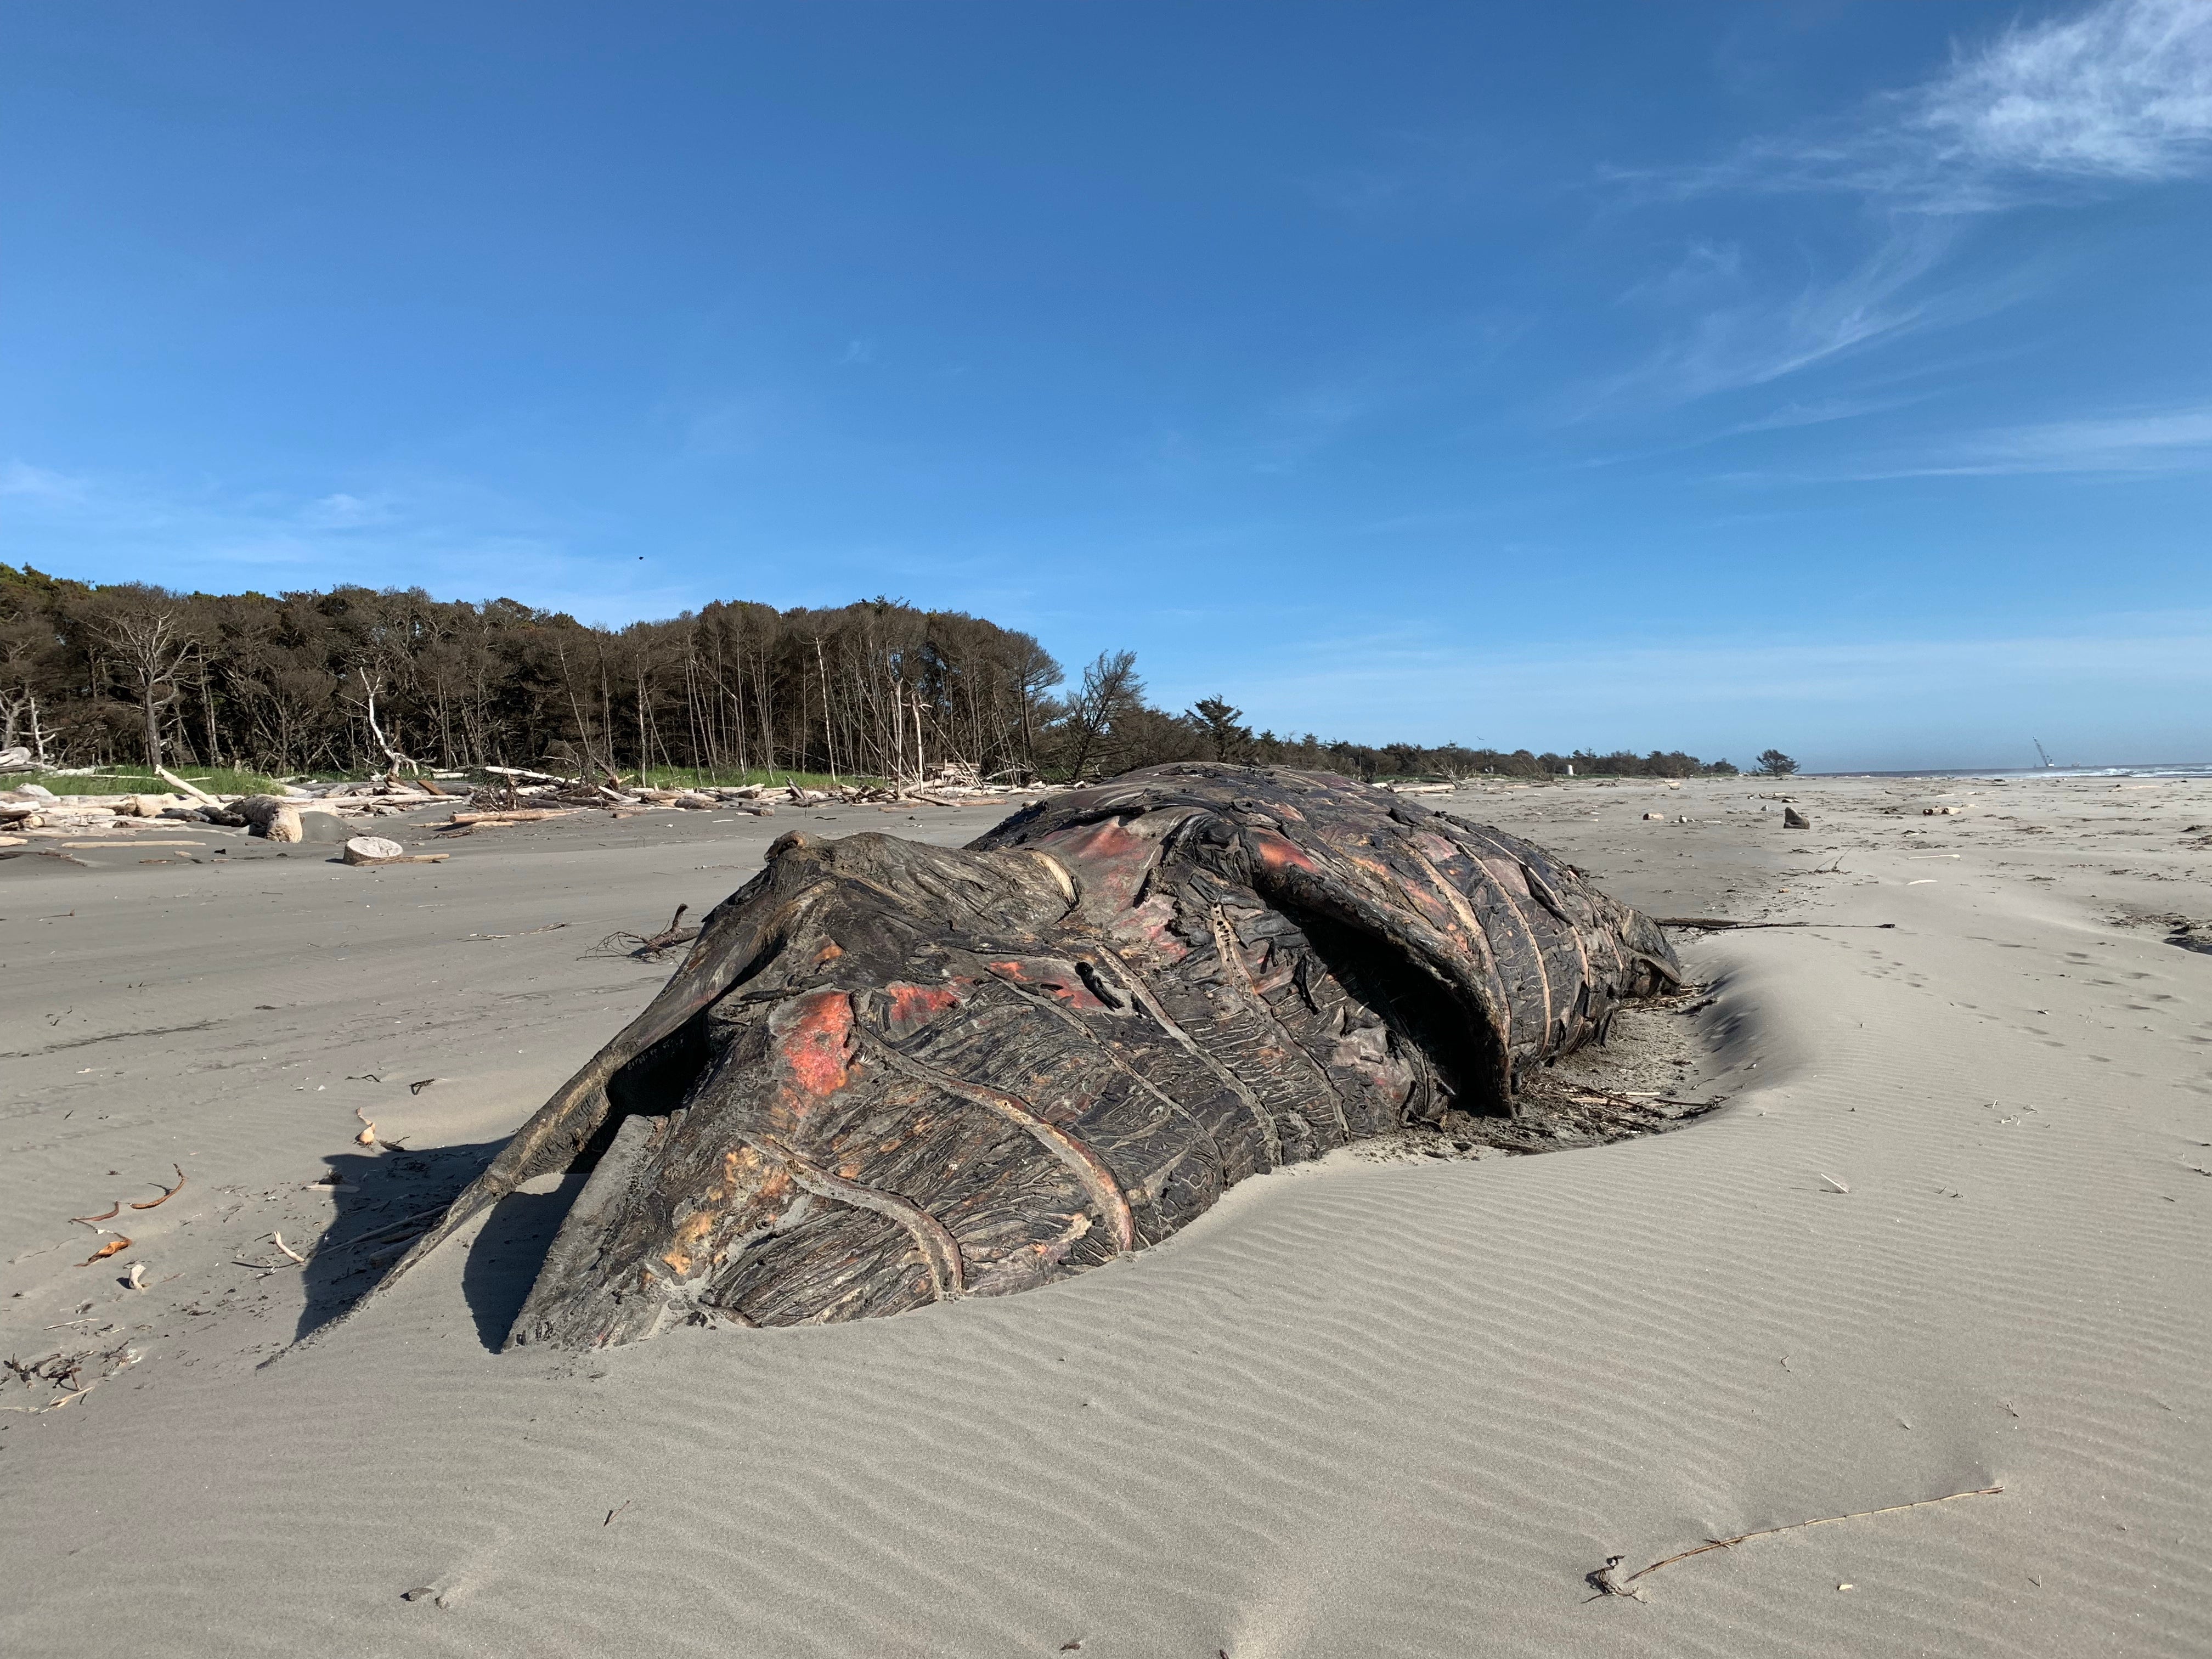 Nature at work on decomposing beached whale, but save yourself and stay upwind!